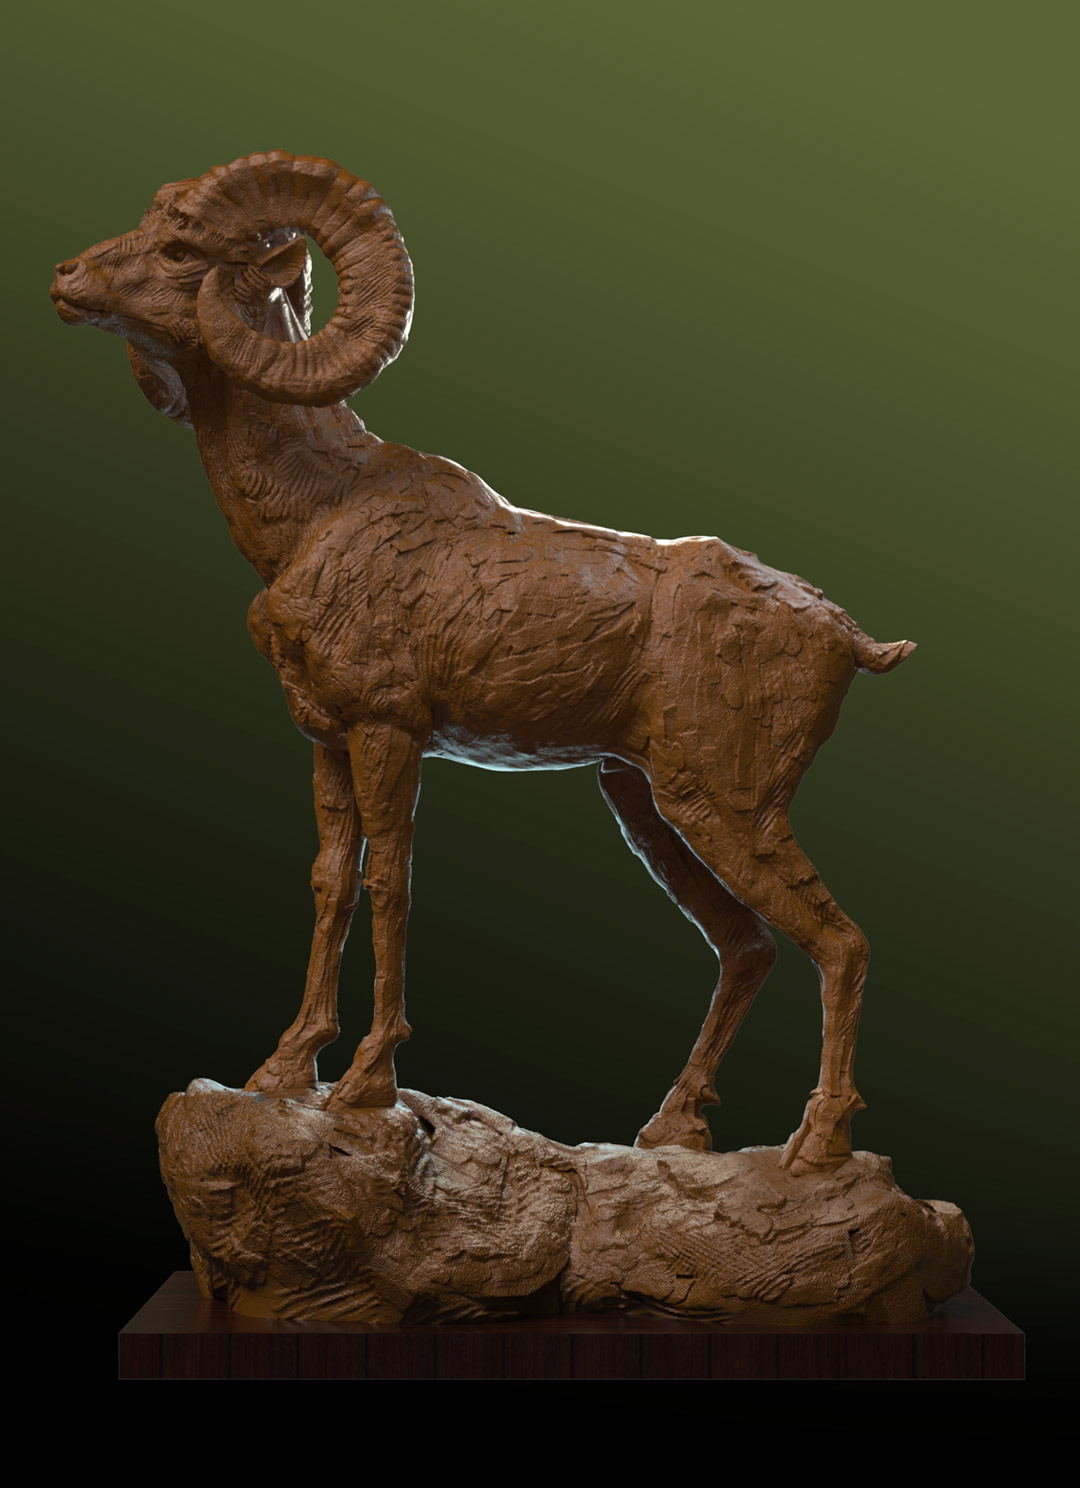 Bn Vichar: Made with ZBrush for iPad